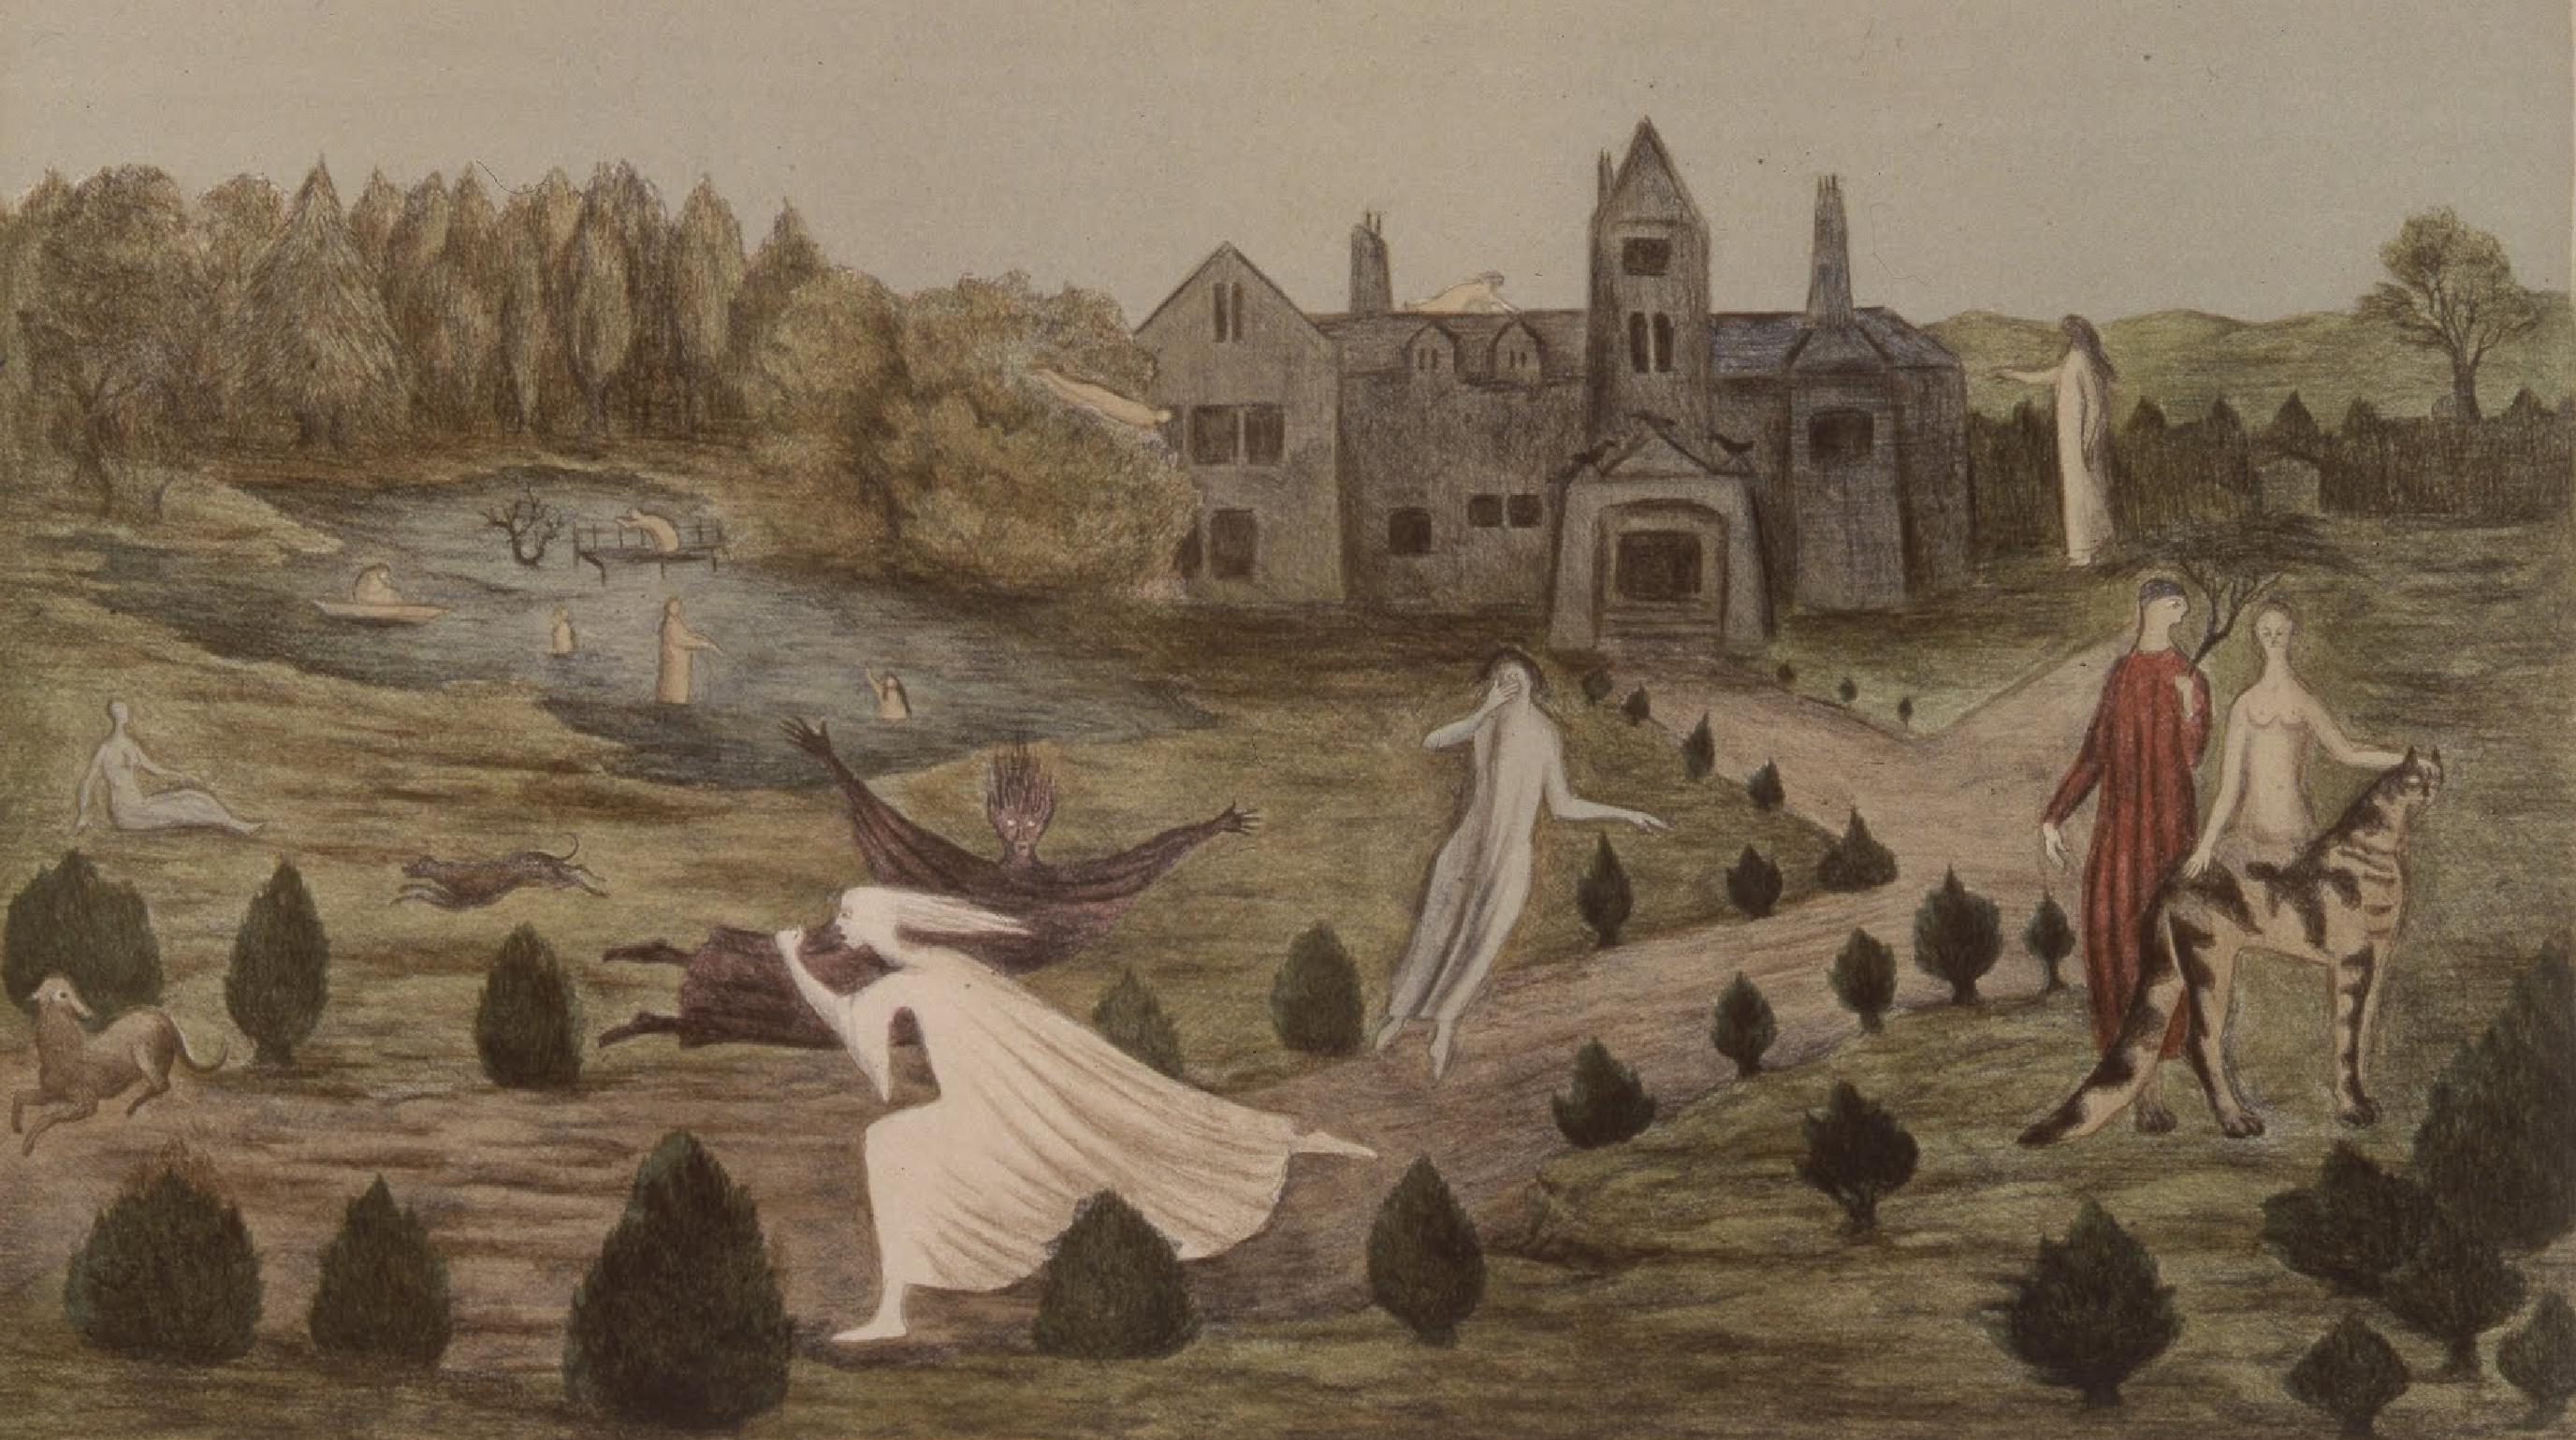 Crookhey Hall, Leonora Carrington 1987 a lithogrpah of the gothic mansion in Lancashire that Carrington spent her childhood in.